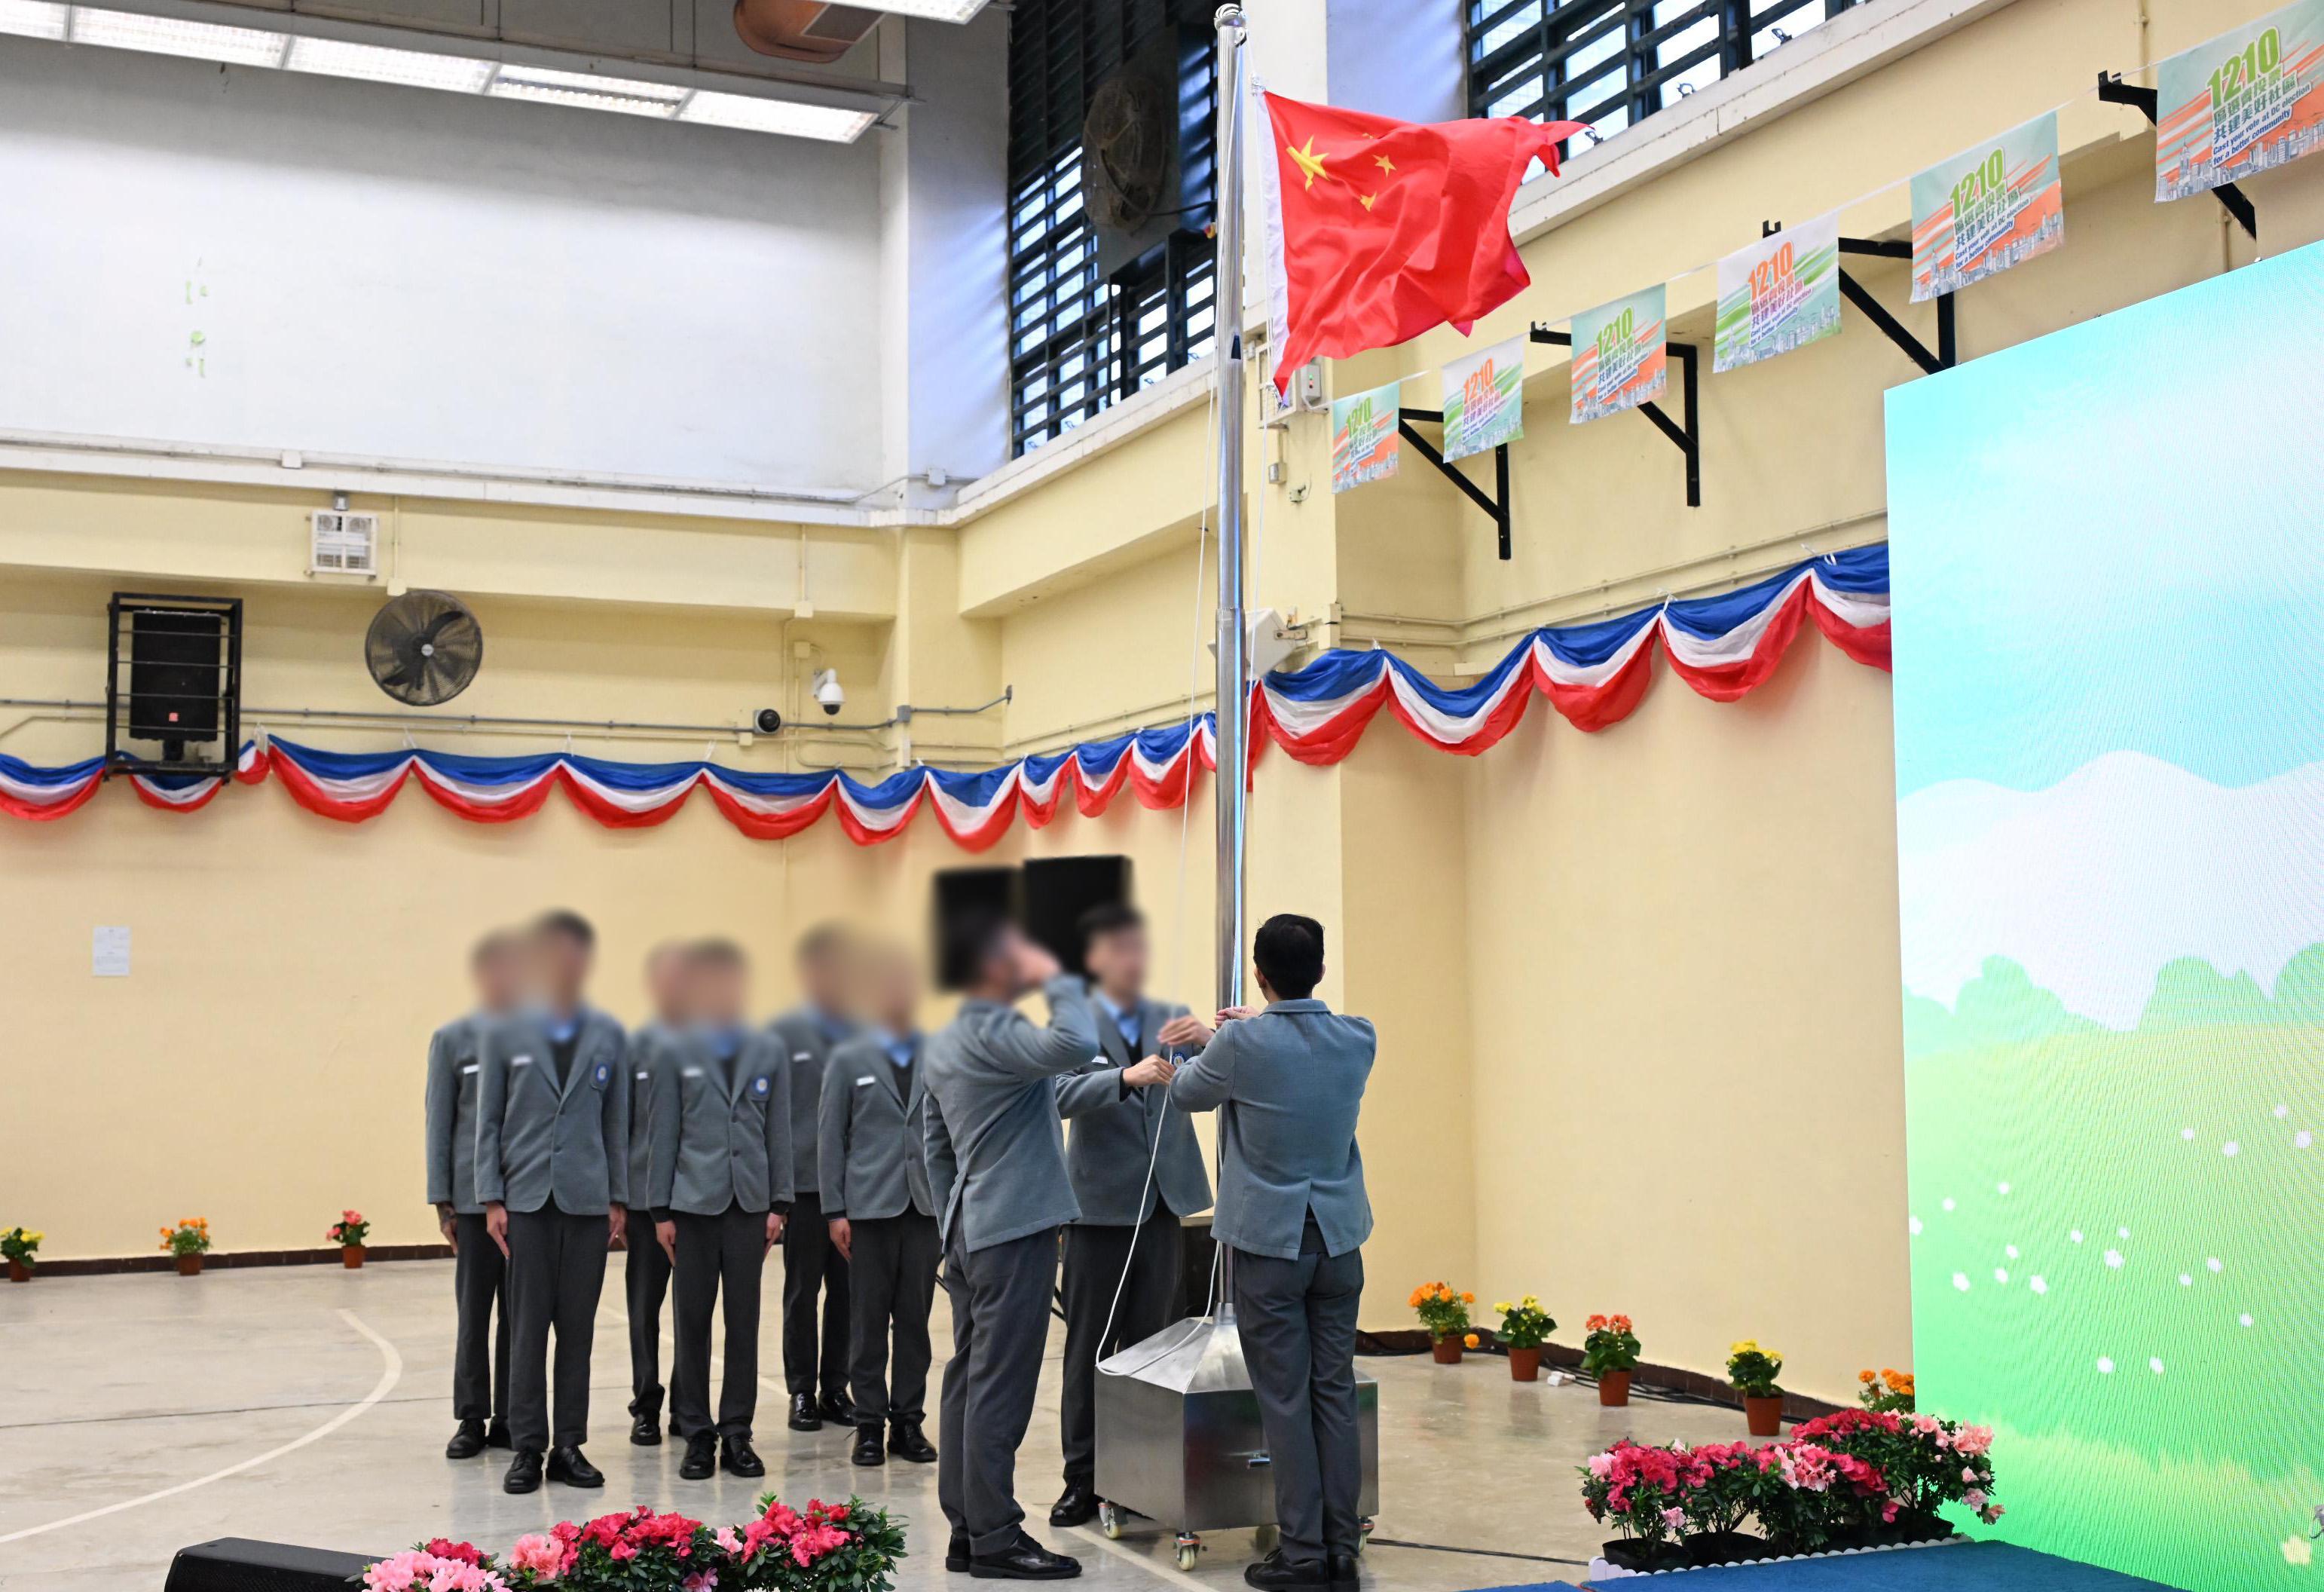 The Correctional Services Department held the opening ceremony of the Ethics College at Pak Sha Wan Correctional Institution today (November 30). Photo shows a flag raising team composed of persons in custody performing a flag raising ceremony.